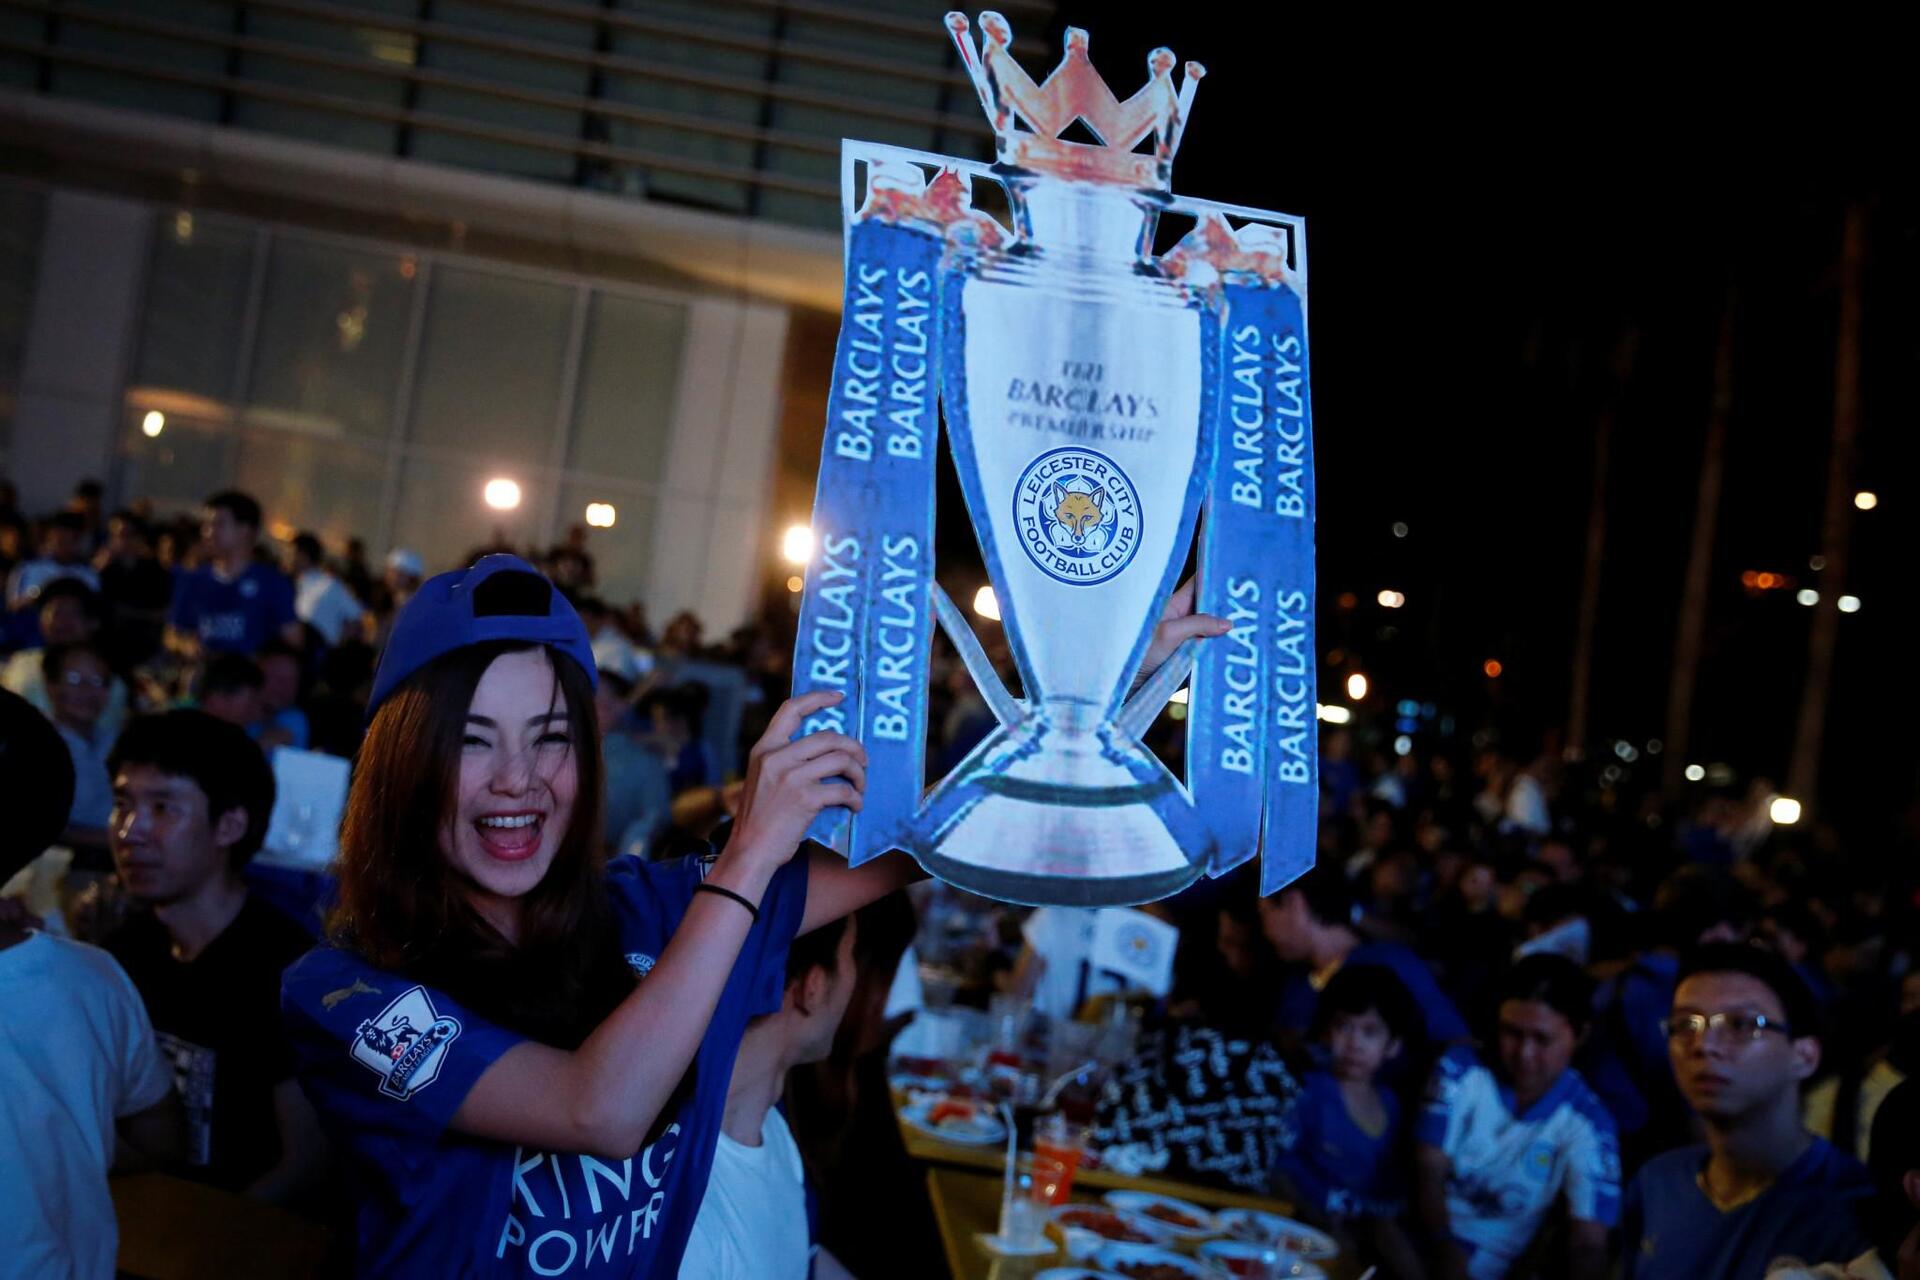 Leicester City fans celebrate after their team drew against Manchester United while watching the game on a big screen in Bangkok